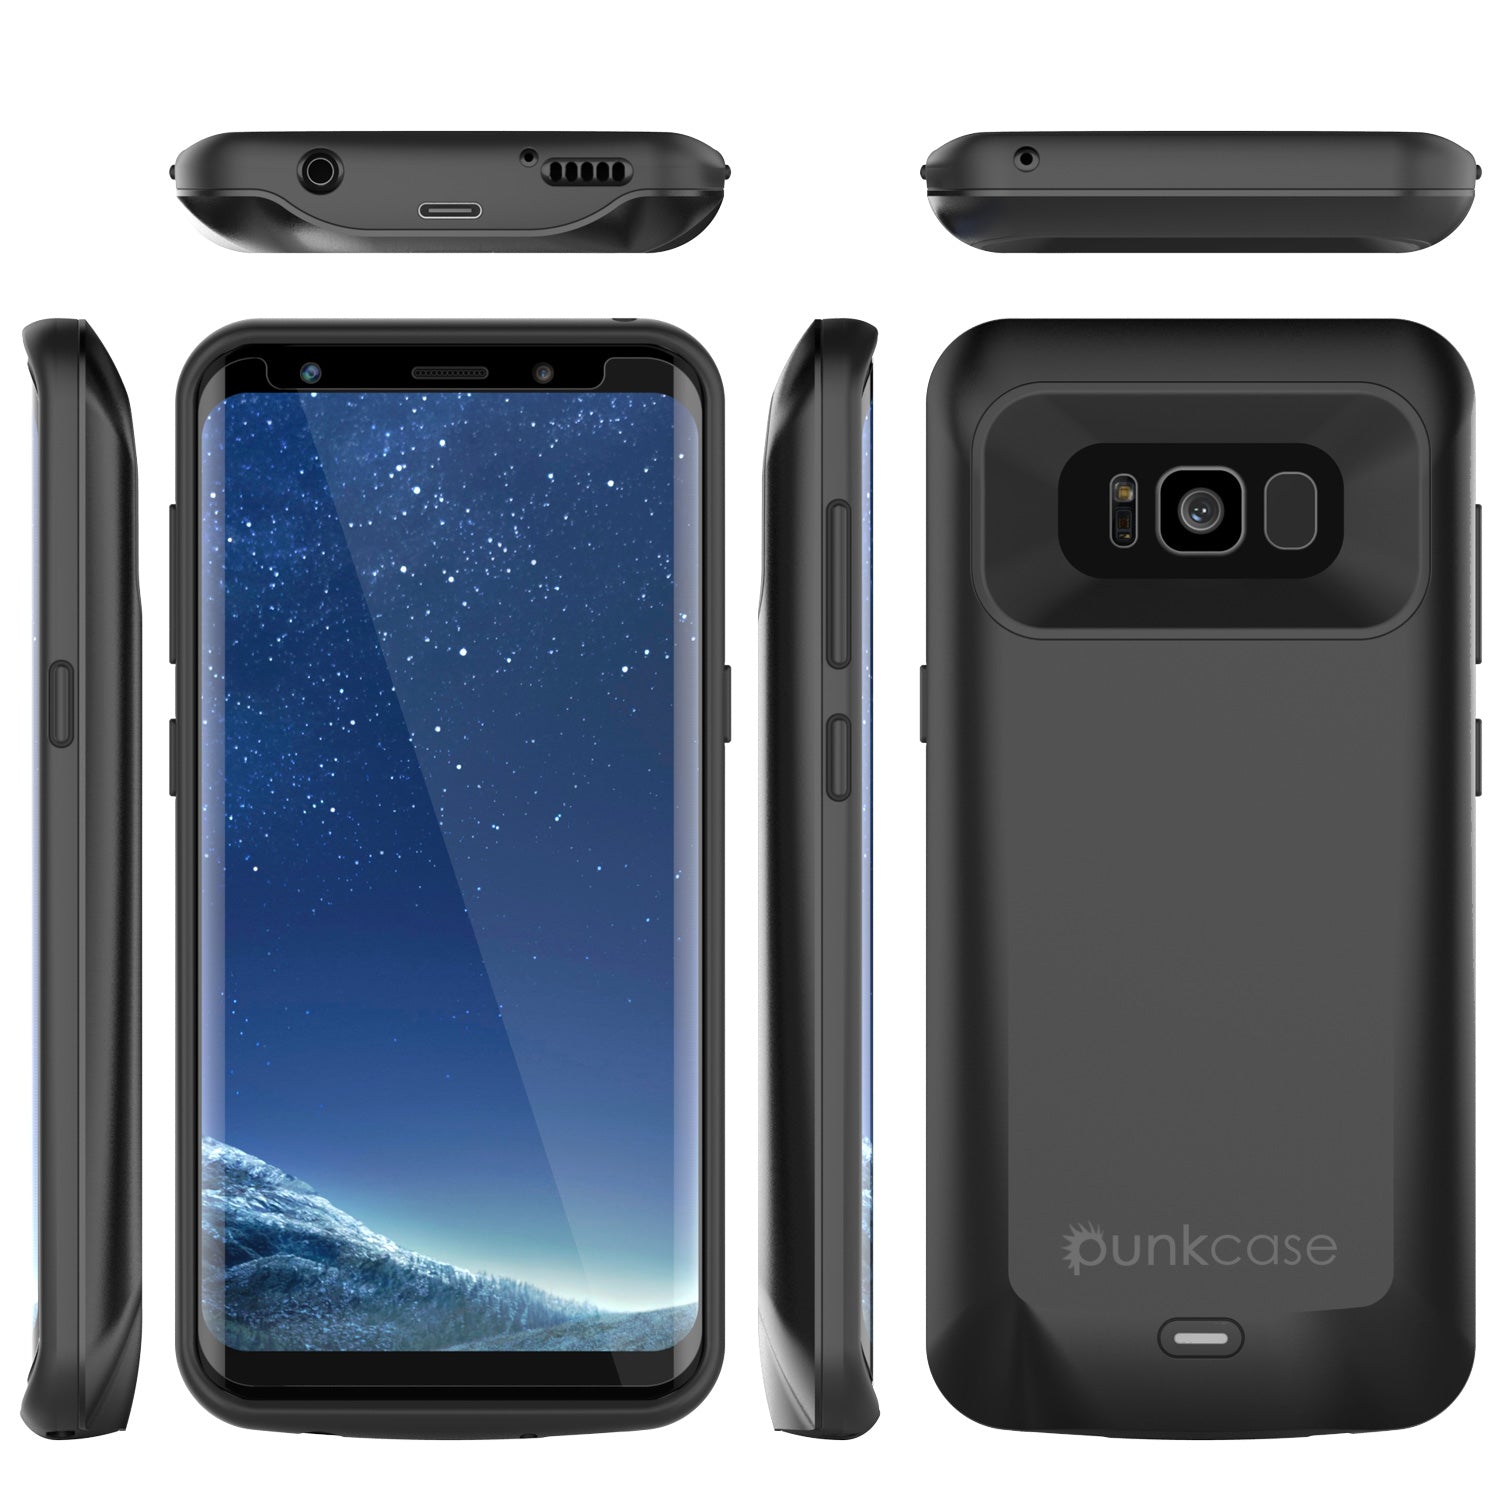 Galaxy S8 Battery 5000mAH Charger Case W/ Protec punkcase